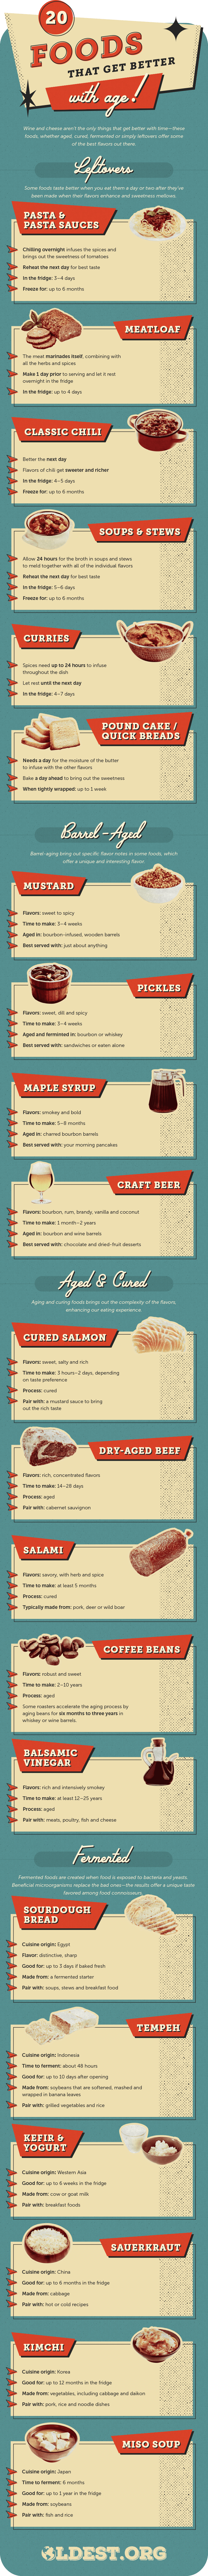 food that gets better with age infographic